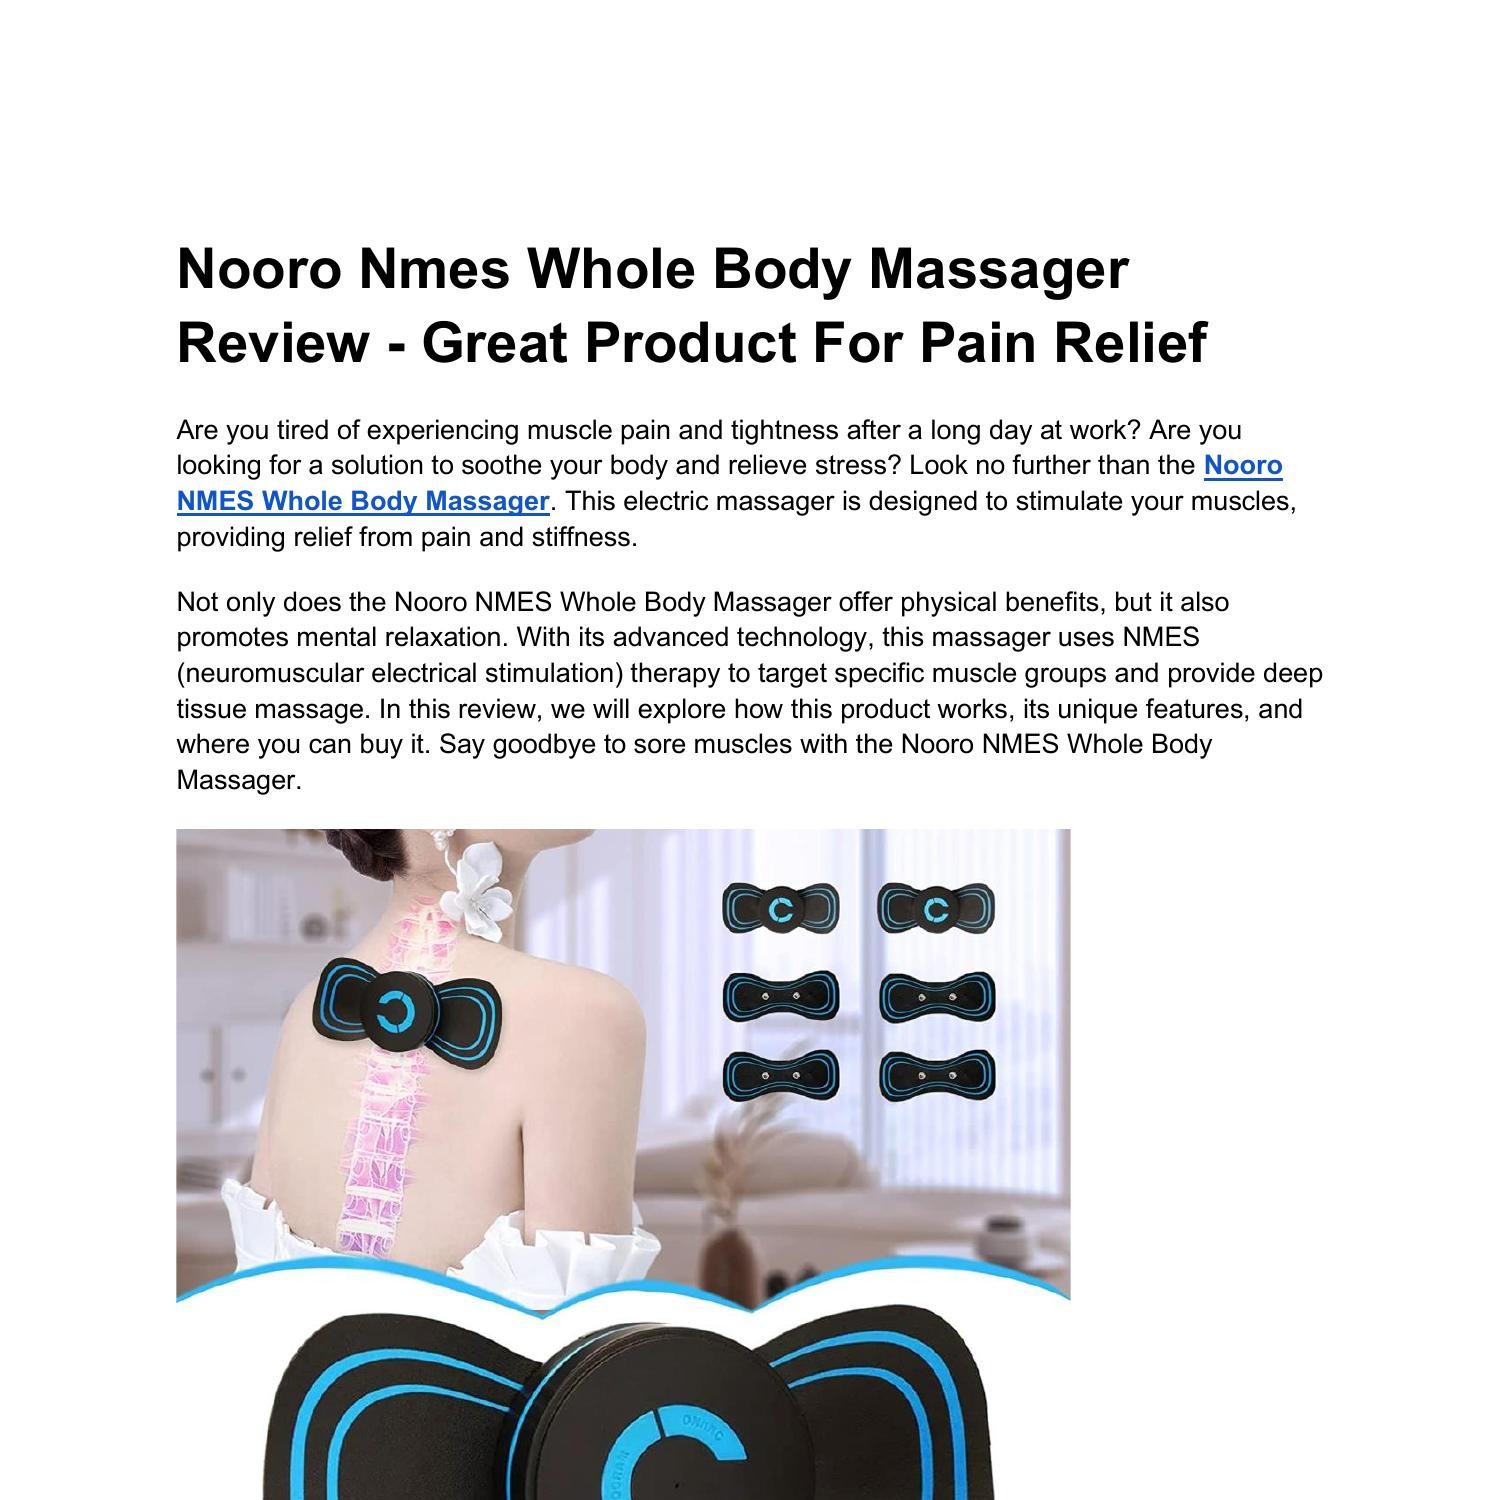 Whole Body Massager - Better Than Nooro - Muscle Pain Relief Device